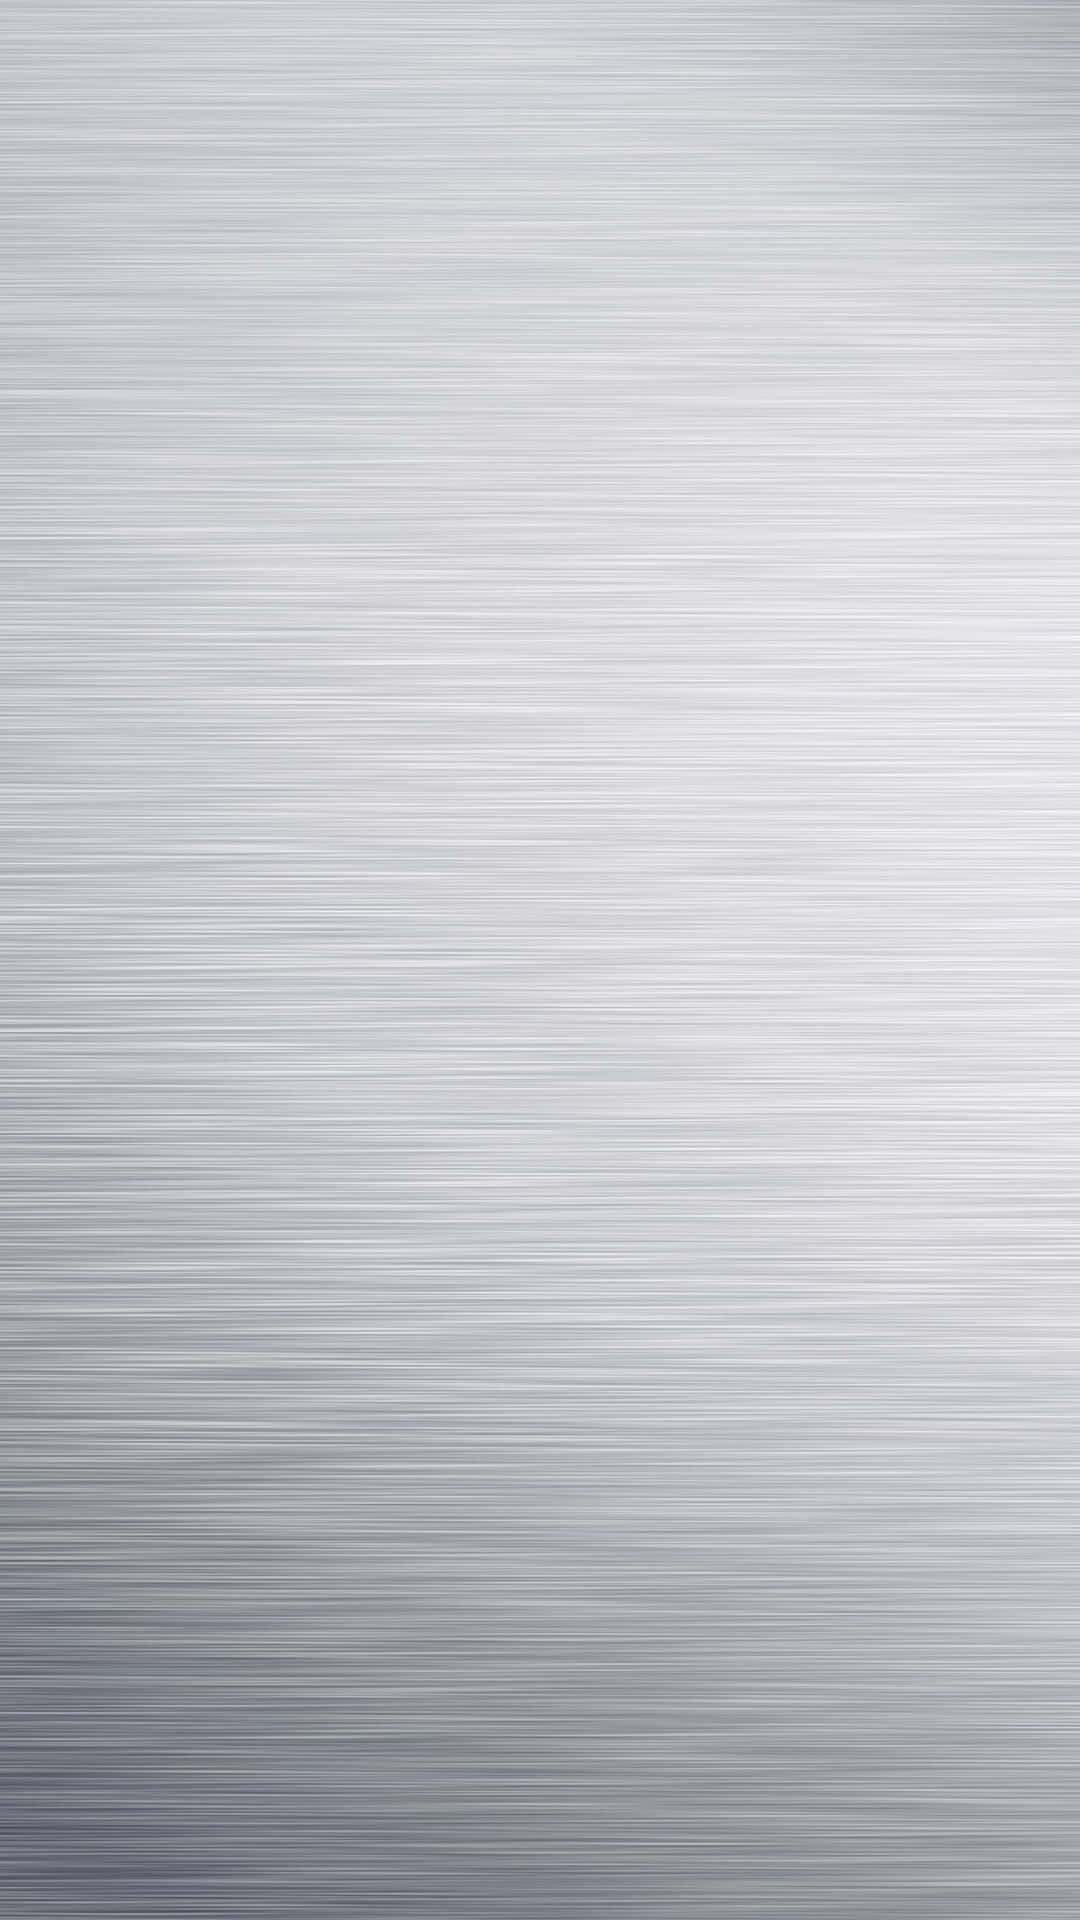 A Silver Metal Plate Background With A Textured Surface